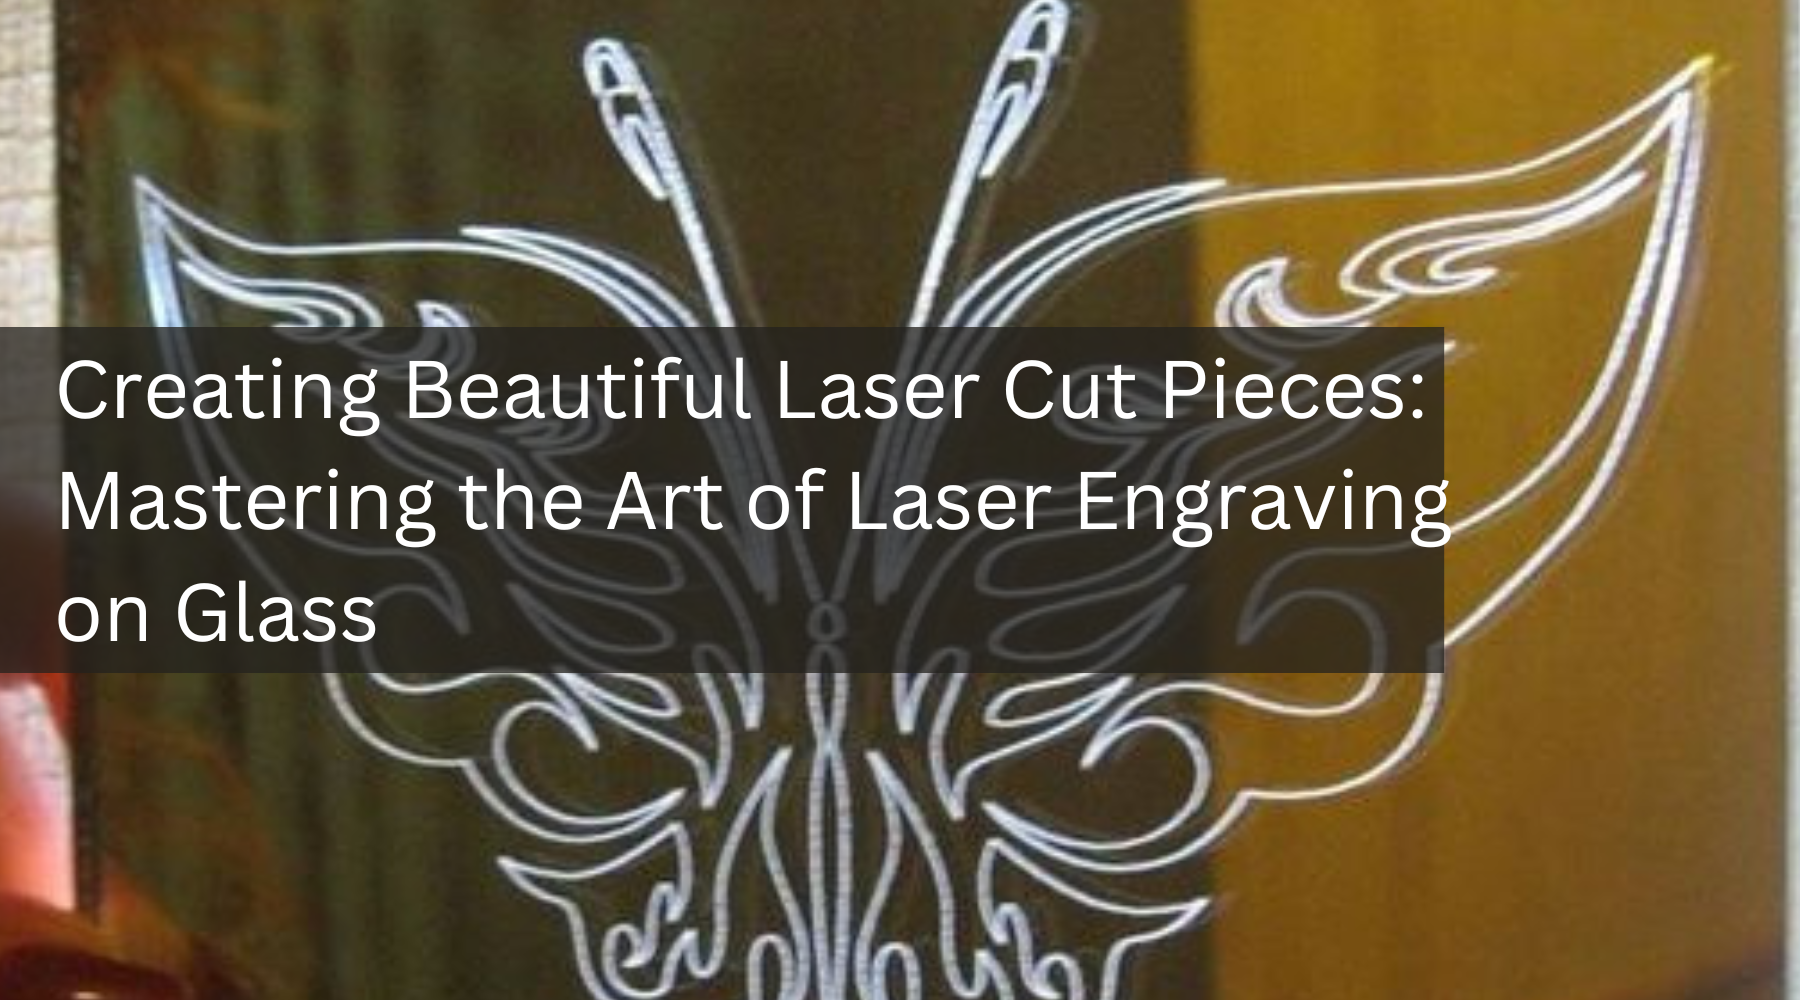 The Best Laser Engraving Software: Spark Your Creativity with LightBurn